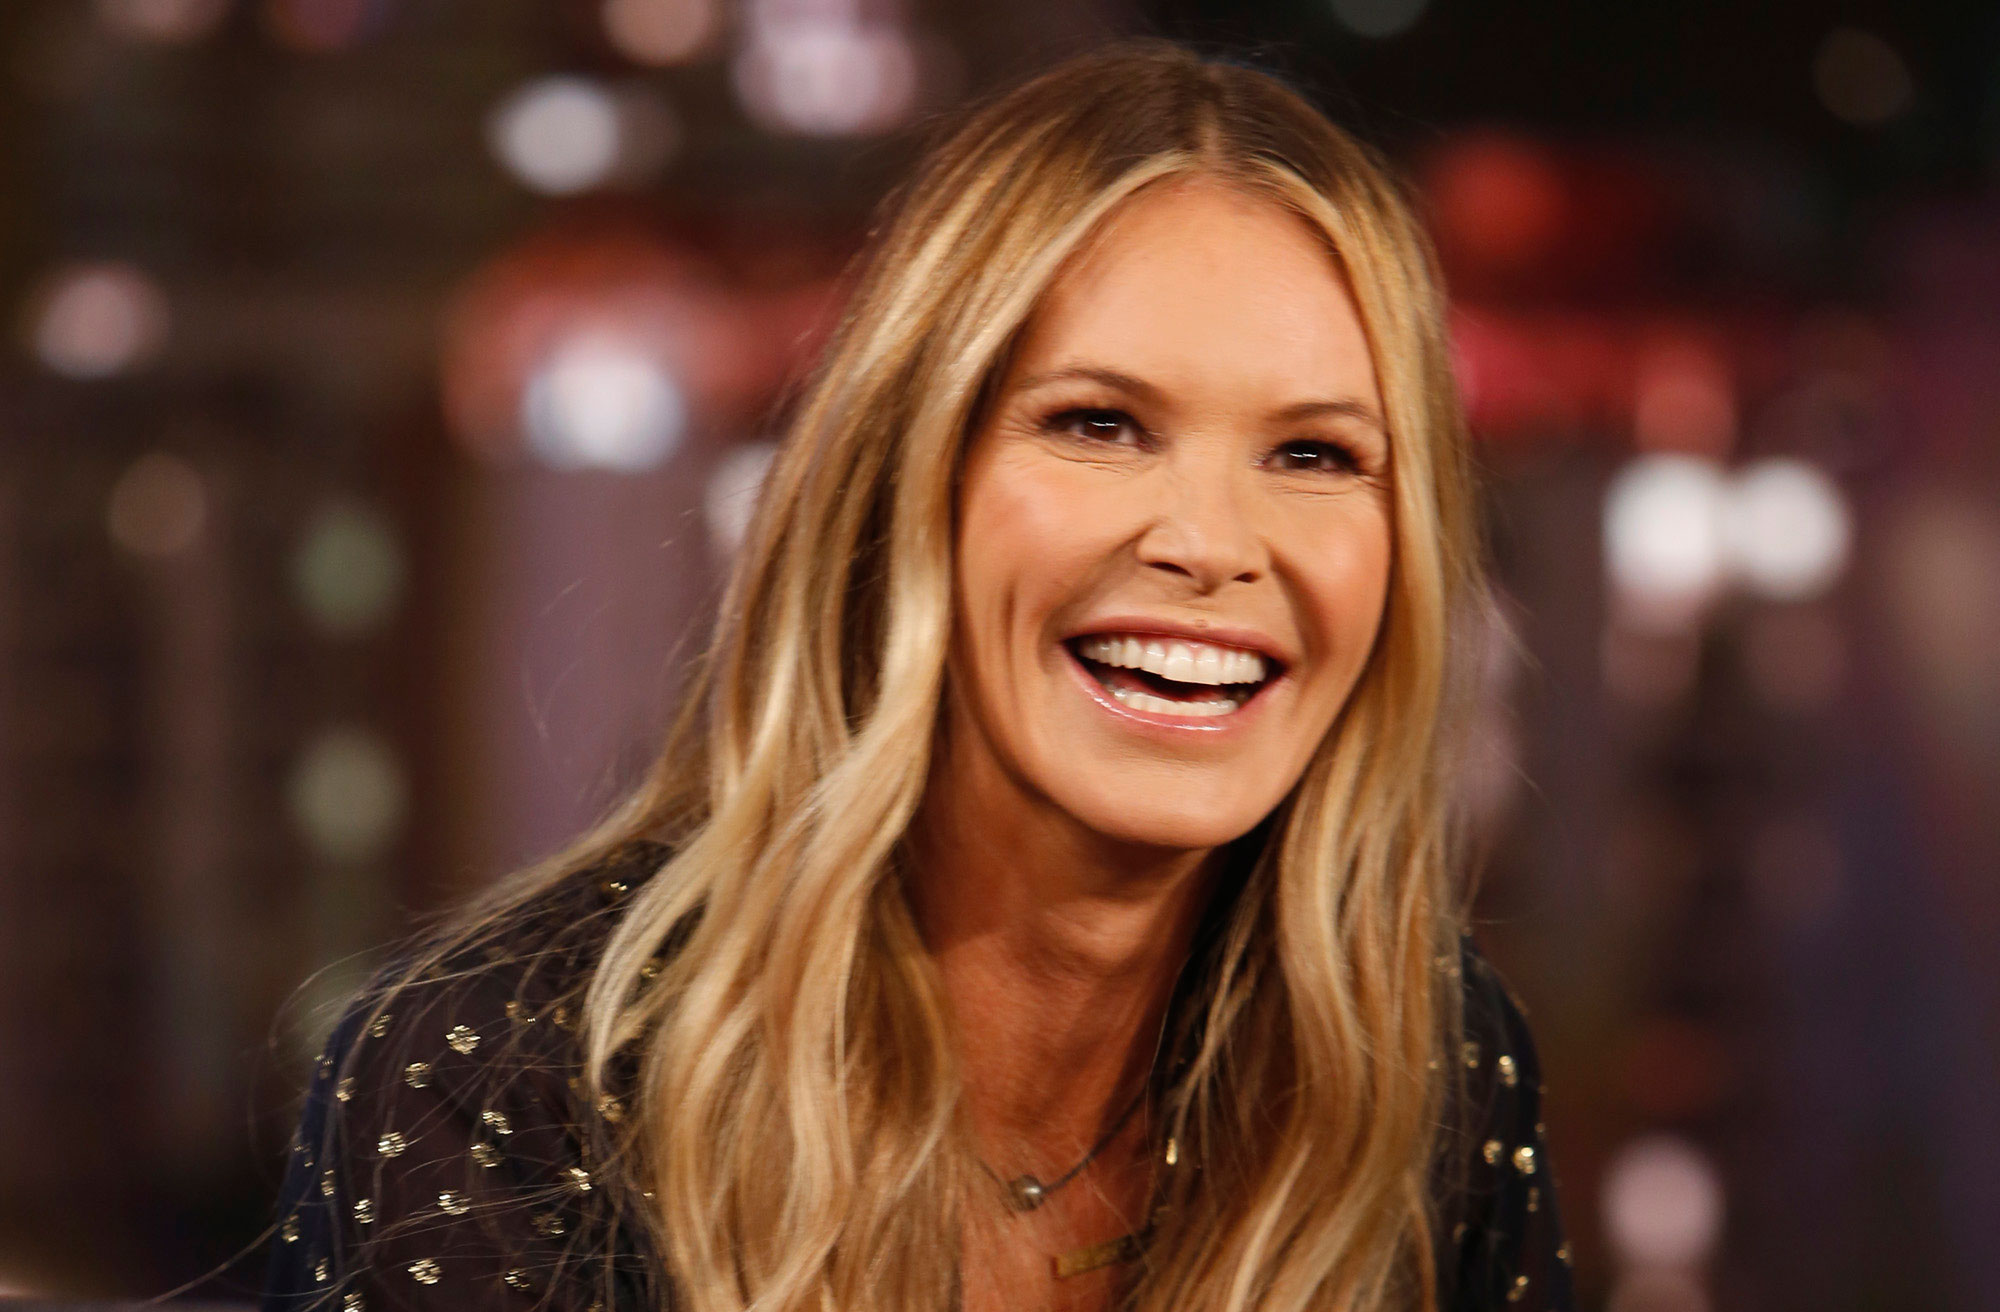 Elle MacPherson holidays in New Zealand – and shows off her photography skills